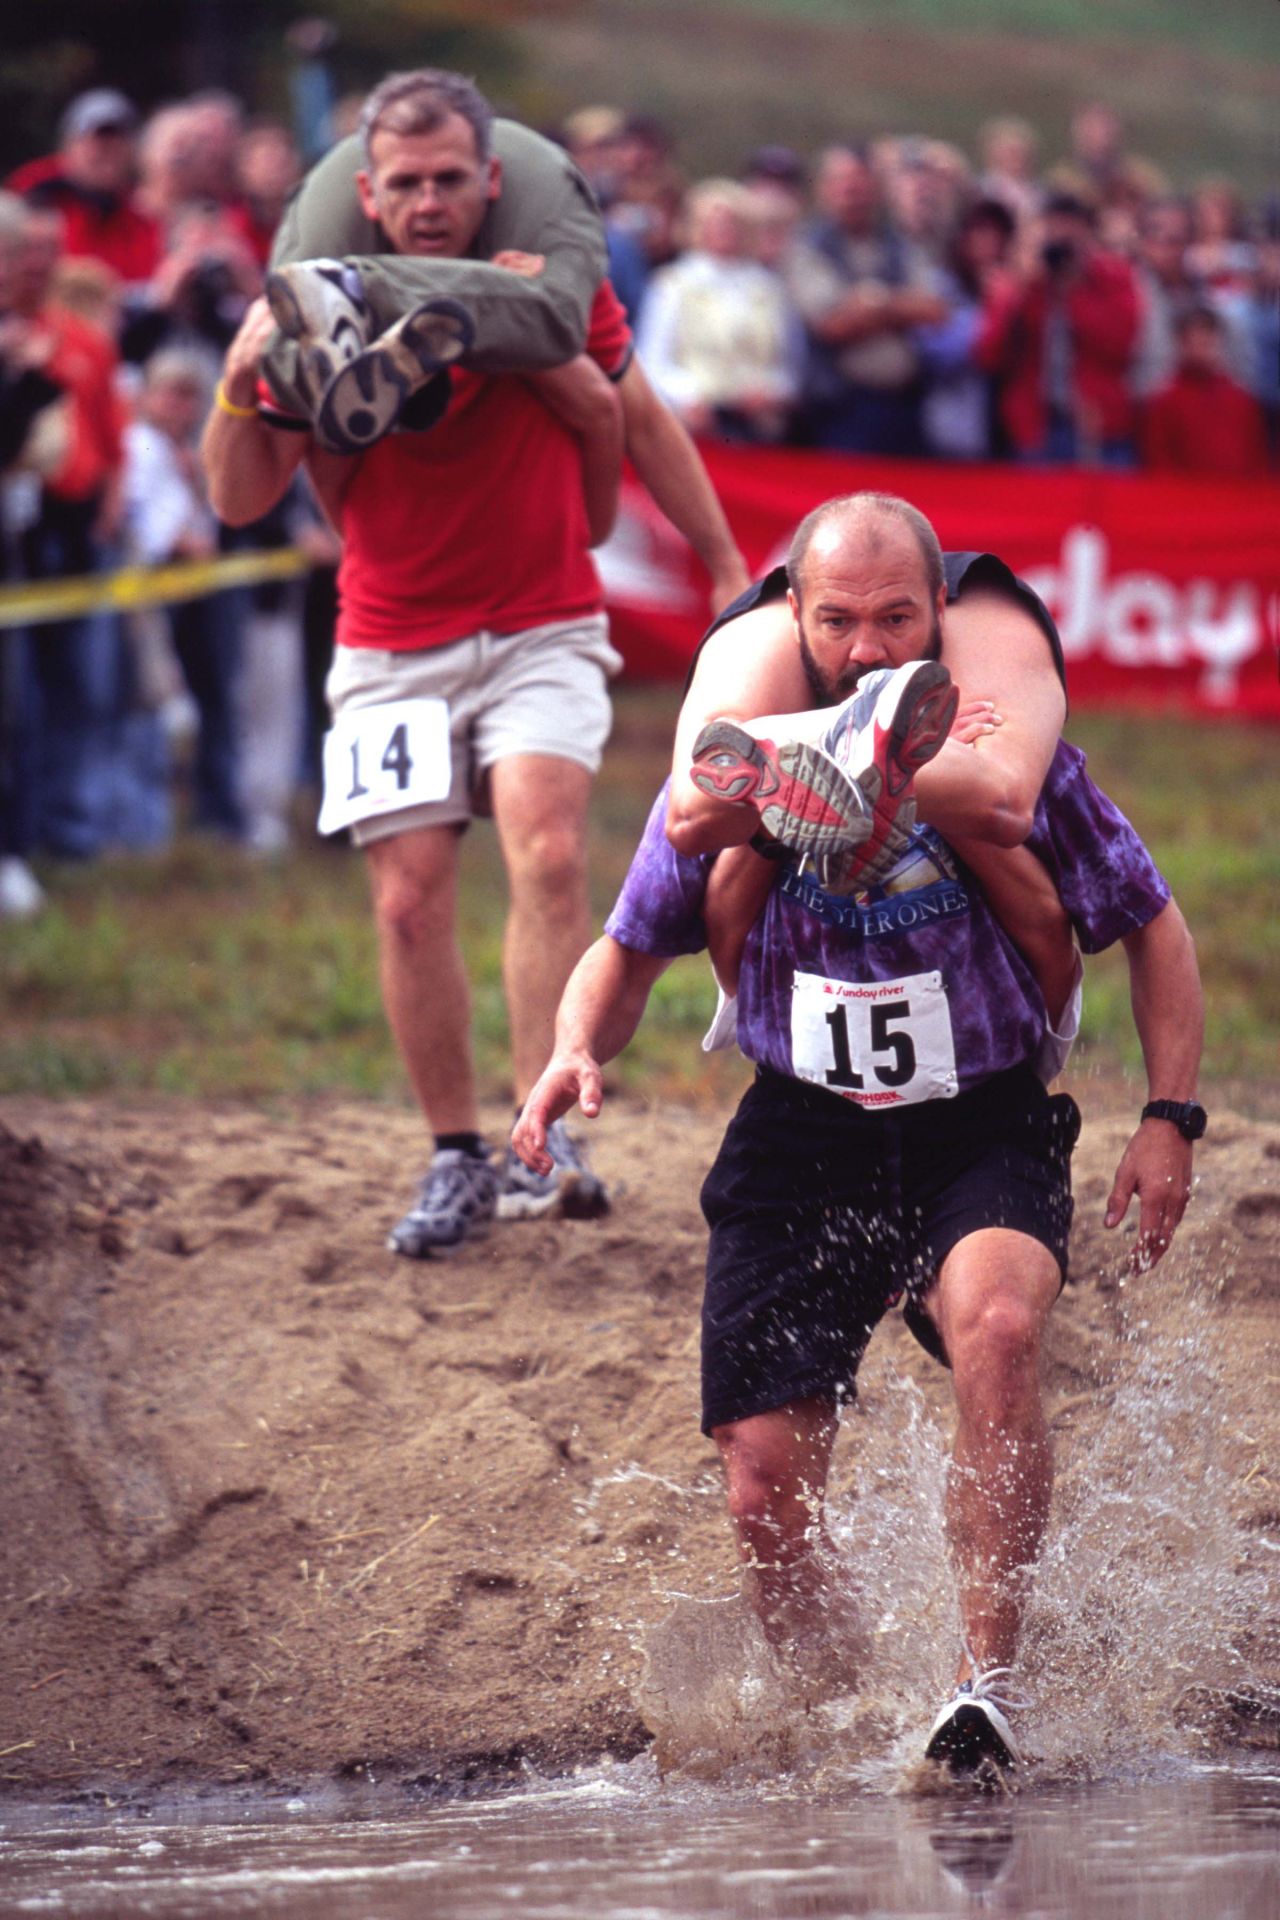 Those looking for a shorter race might be interested in the <a href="http://www.sundayriver.com/Events/Main/Summer/Wife_Carrying_Championship.html" target="_blank" target="_blank">Wife Carrying Championship</a> held at the Sunday River ski resort in Maine during Fall Festival Weekend. The 278-yard dash is usually won by a couple using the "Estonian carry," seen here.